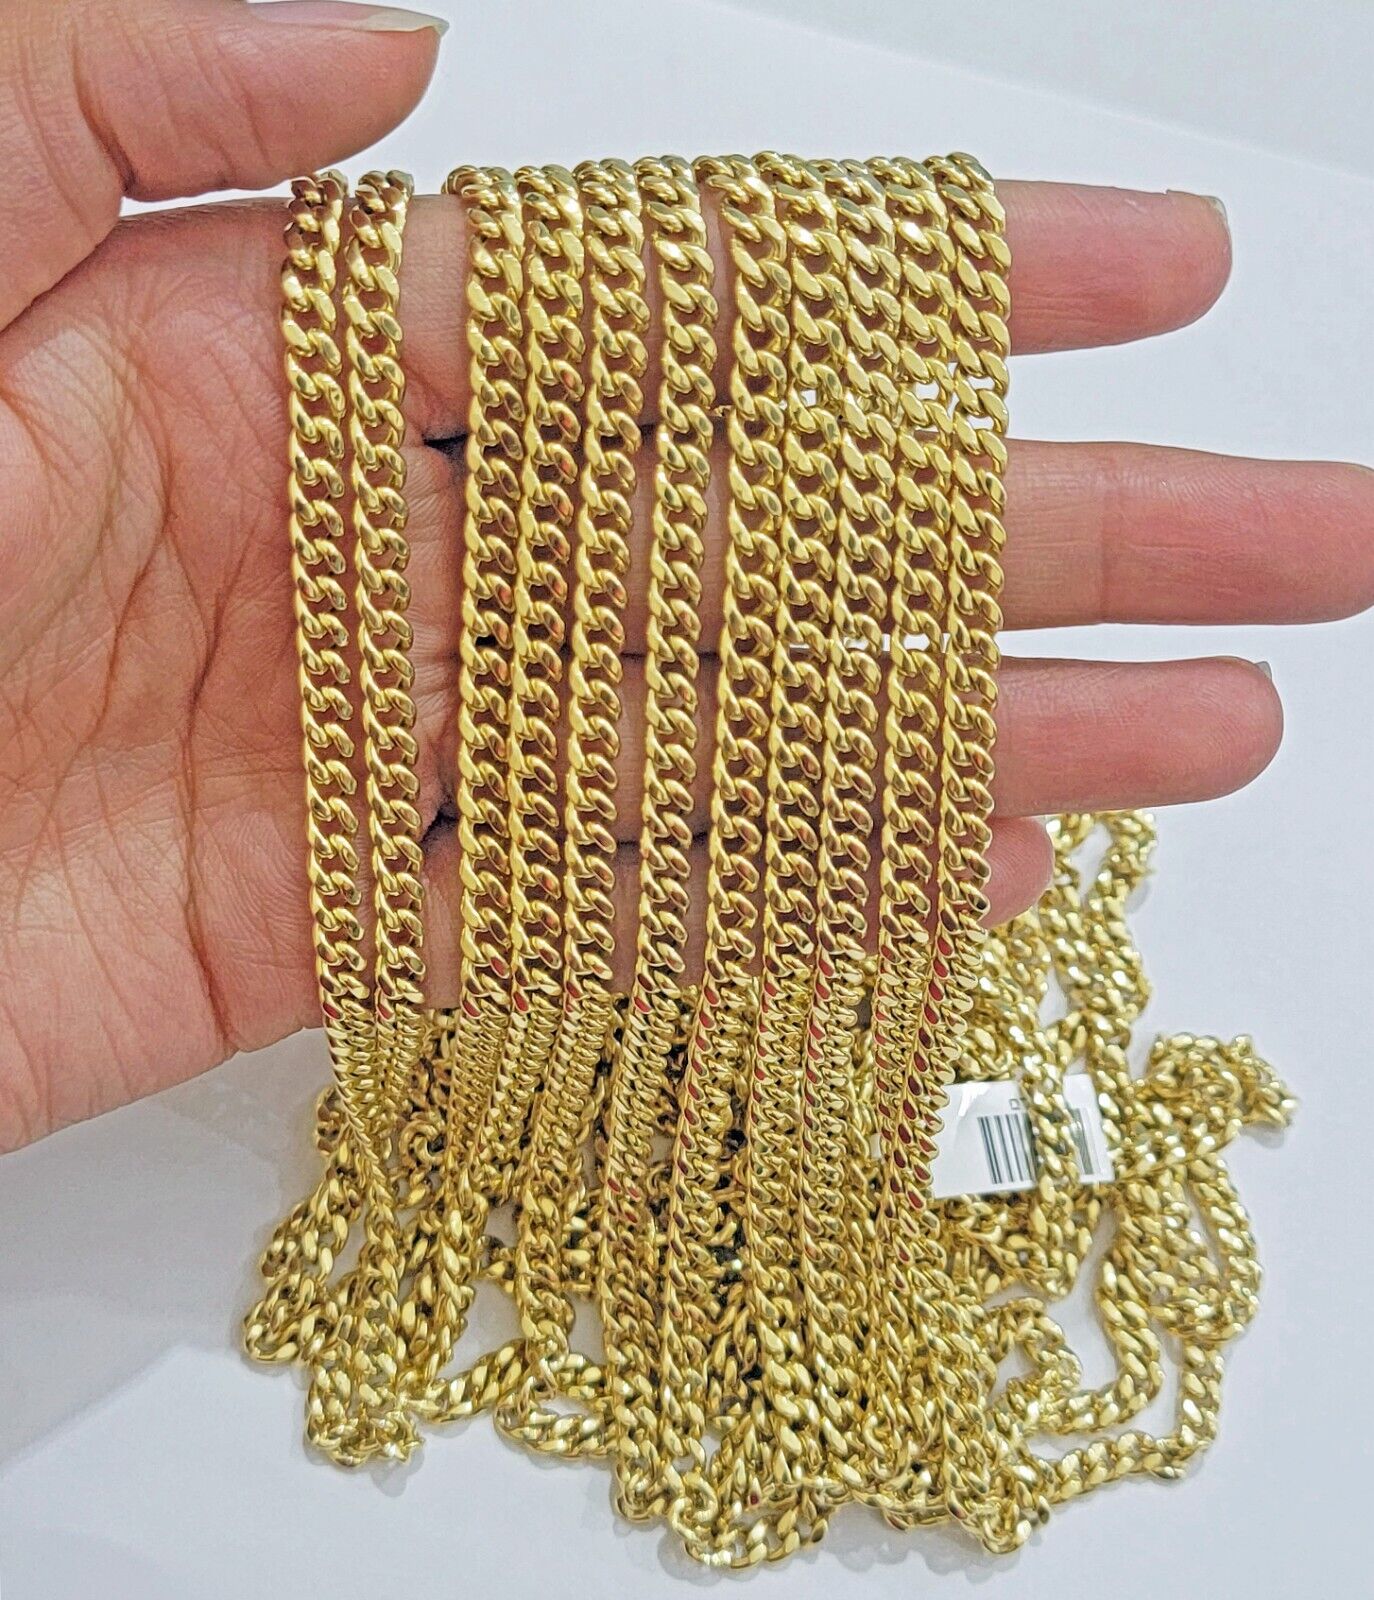 Real 10k Gold chain Necklace Miami Cuban Link 5mm 16"-28" 10kt Yellow Men Women